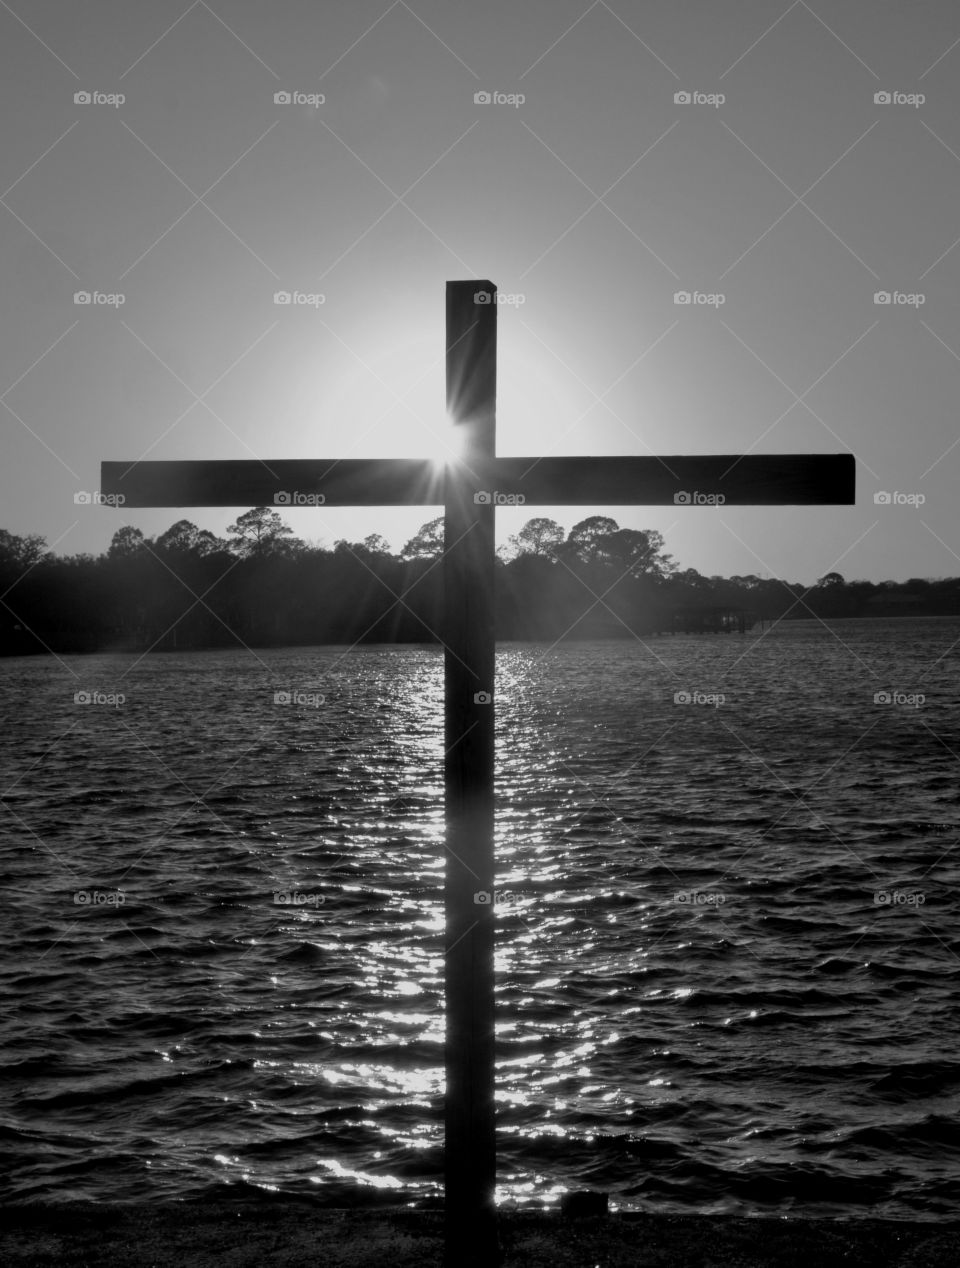 Glorious sunset!
A wooden cross stands erect at the waters edge deflecting the bright sun!